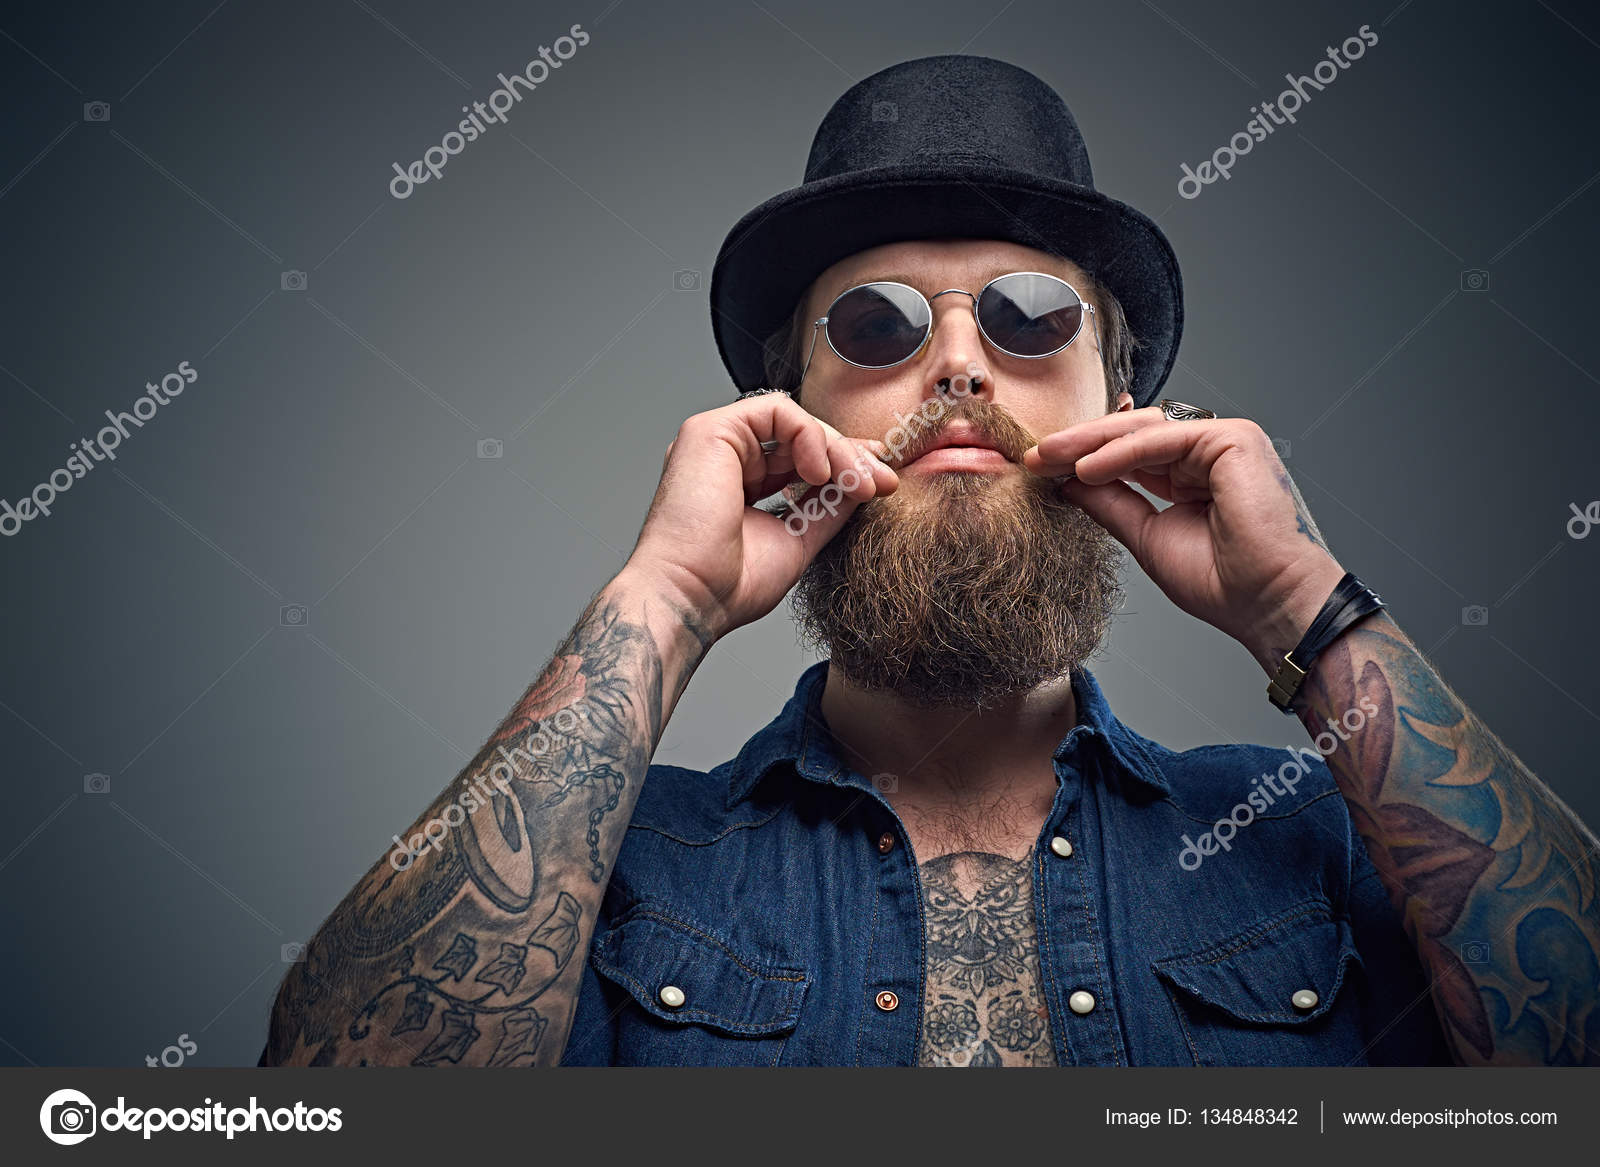 Tattooed hipster man wearing a top hat — Stock Photo © fxquadro #134848342